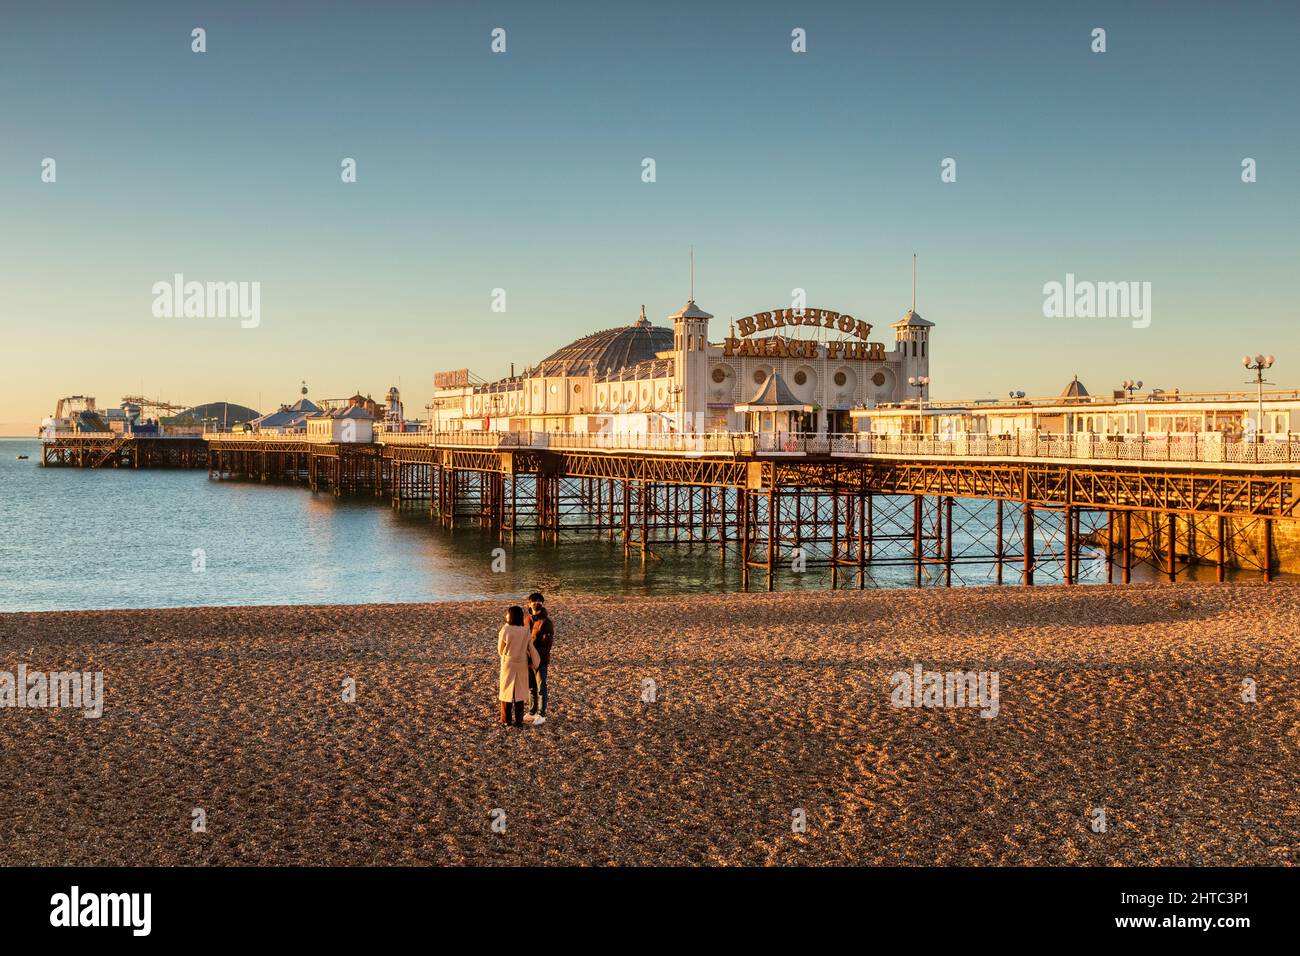 14 January 2022: Brighton, East Sussex, UK - Sunrise at Brighton Palace Pier, with young couple on beach. Stock Photo